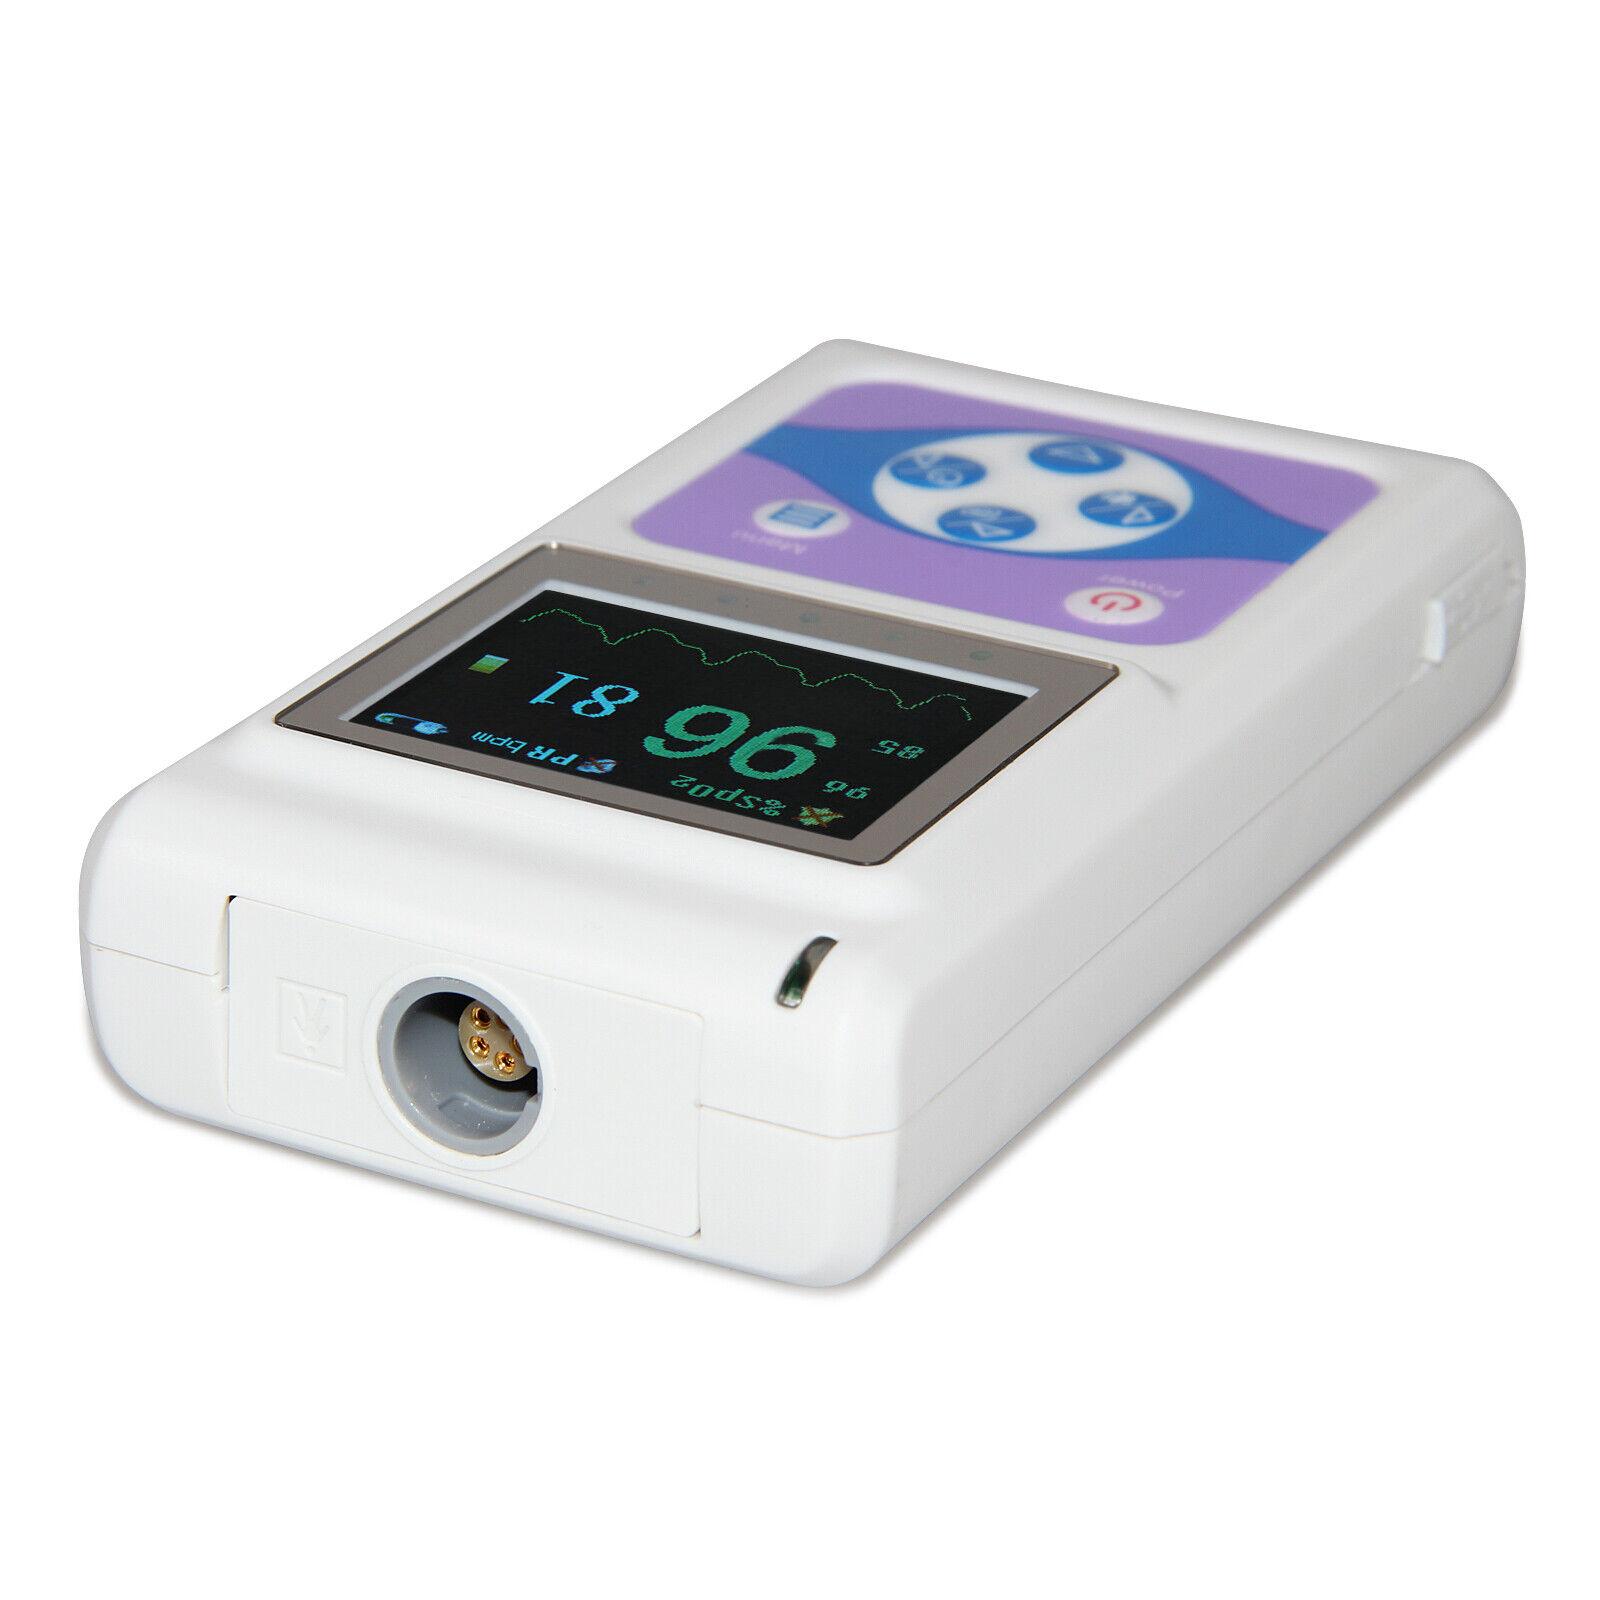 <span  class="uc_style_uc_tiles_grid_image_elementor_uc_items_attribute_title" style="color:#ffffff;">Airial MQ3500 Pediatric Pulse Oximeter</span>